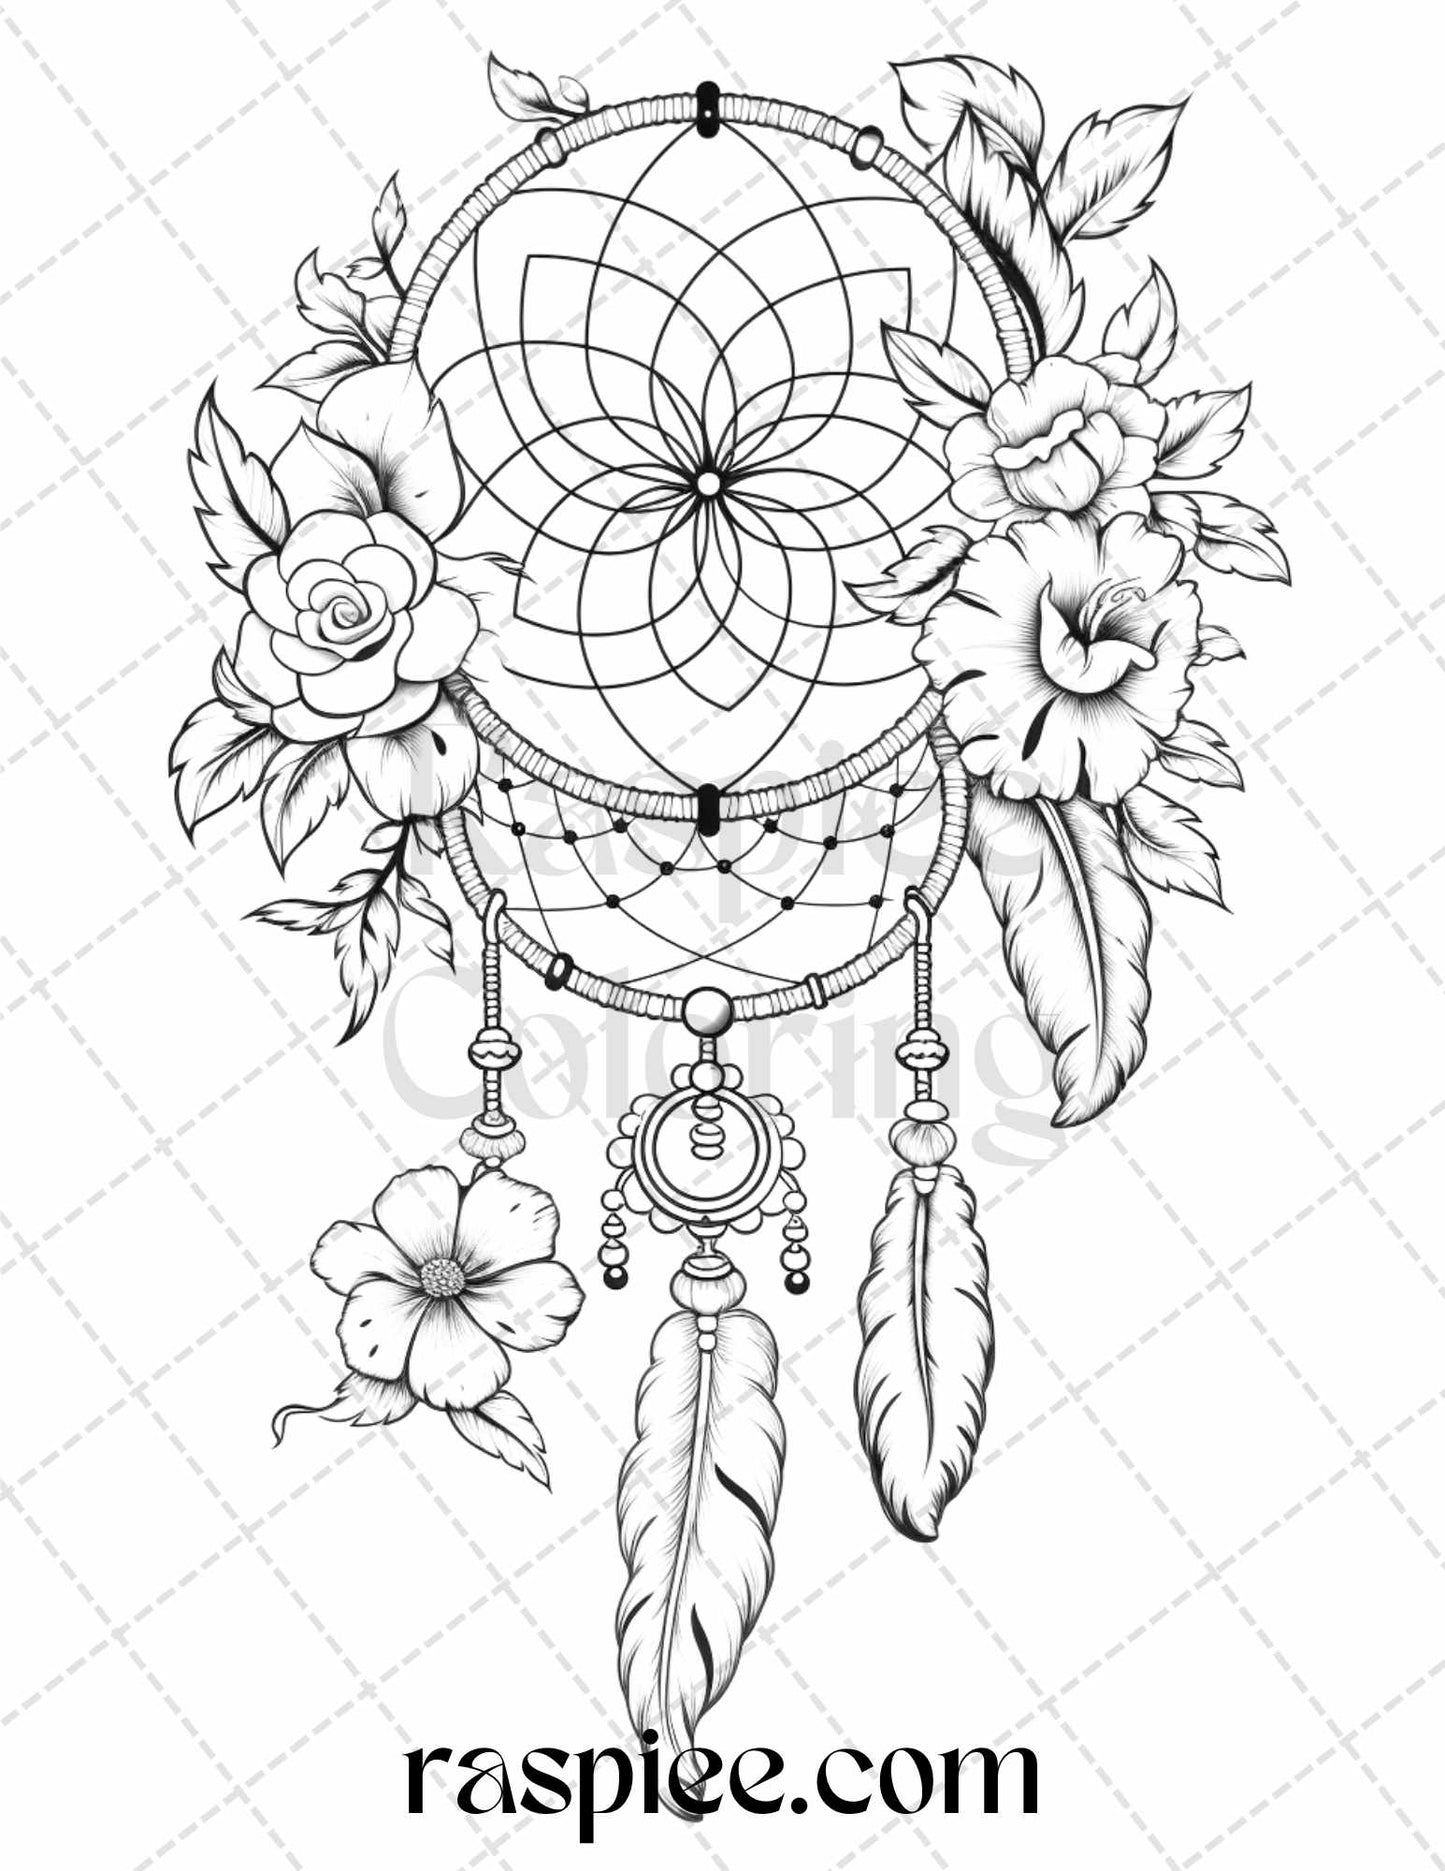 Flower Dreamcatcher Grayscale Coloring Pages Printable for Adults, Relaxing Art Therapy, DIY Coloring, Instant Download, Stress Relief Coloring